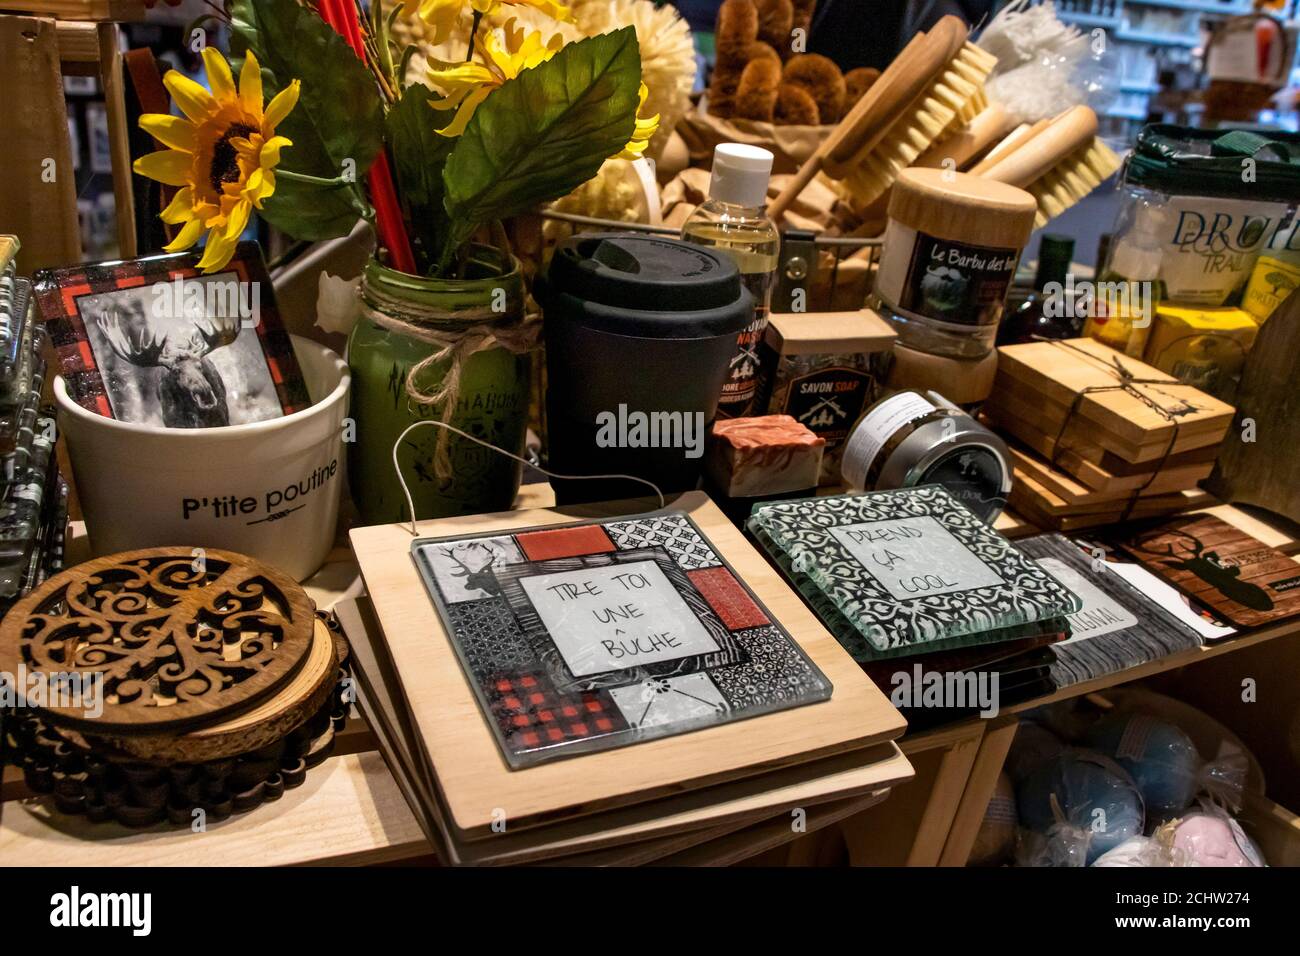 September 12, 2020 - Shawinigan, Qc, Canada: Decoration Items Display in a Québec Gift Shop Stock Photo